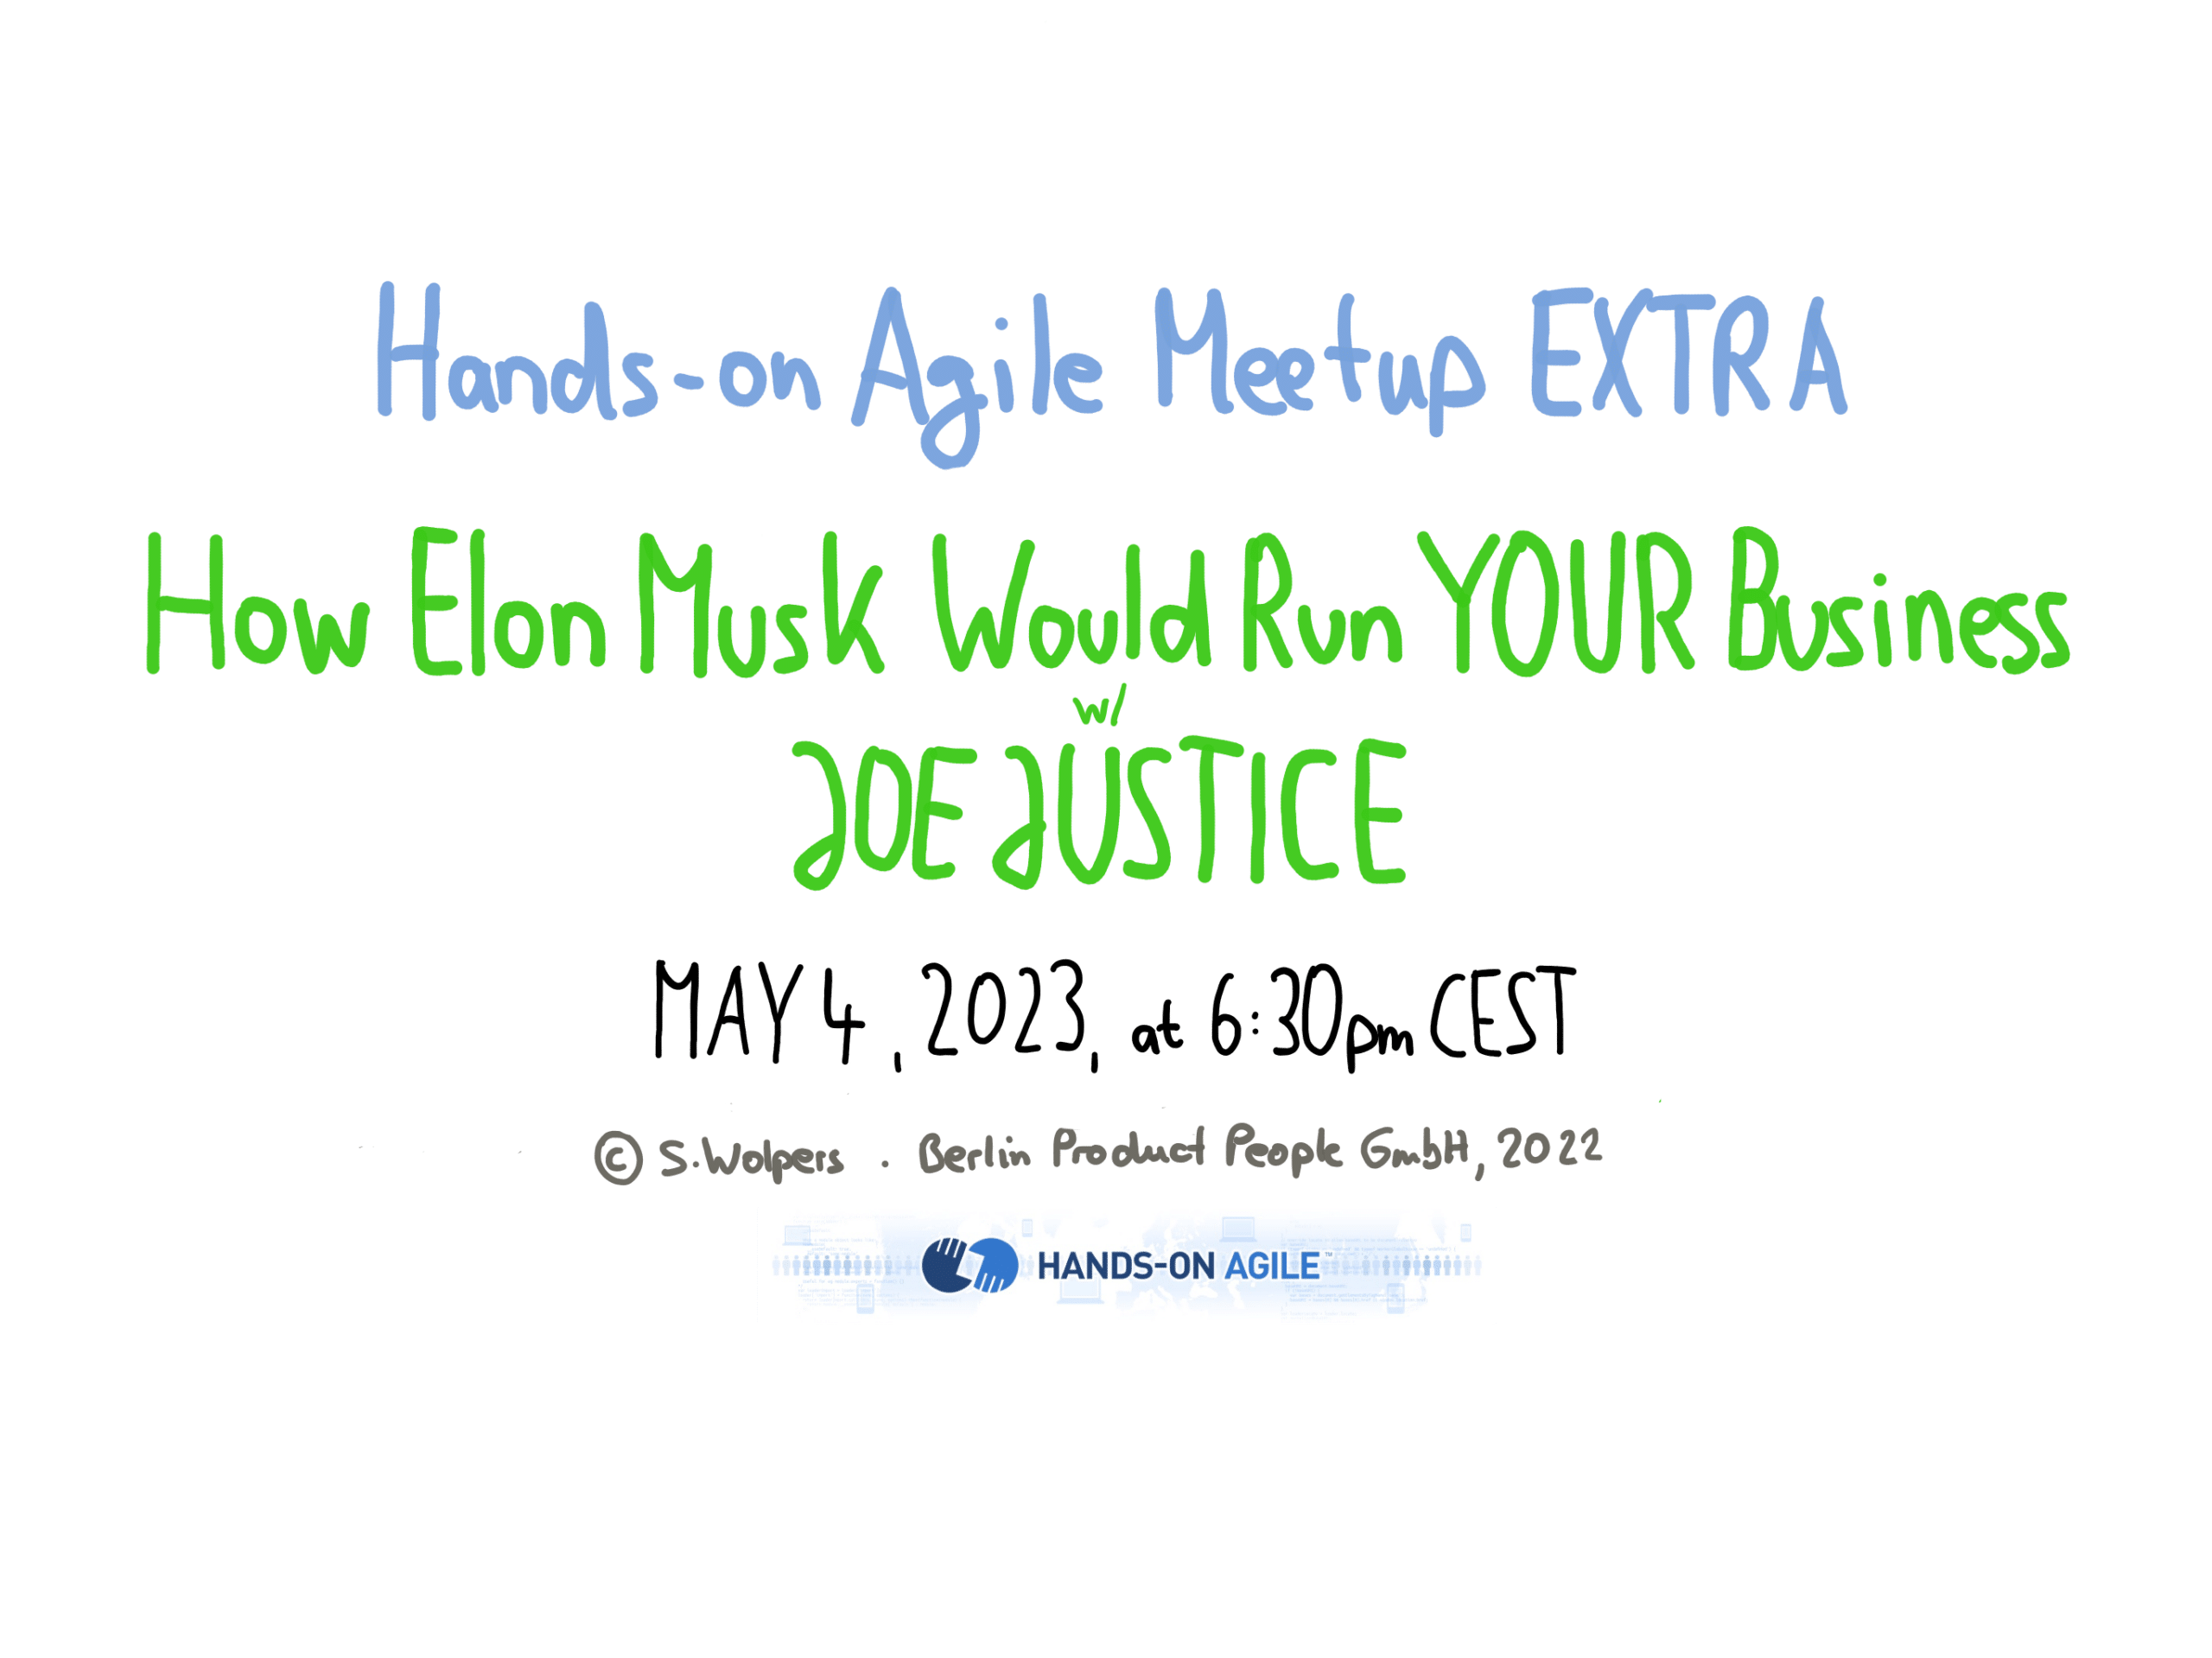 Hands-on Agile EXTRA: How Elon Musk Would Run YOUR Business with Joe Justice — May 4, 2023